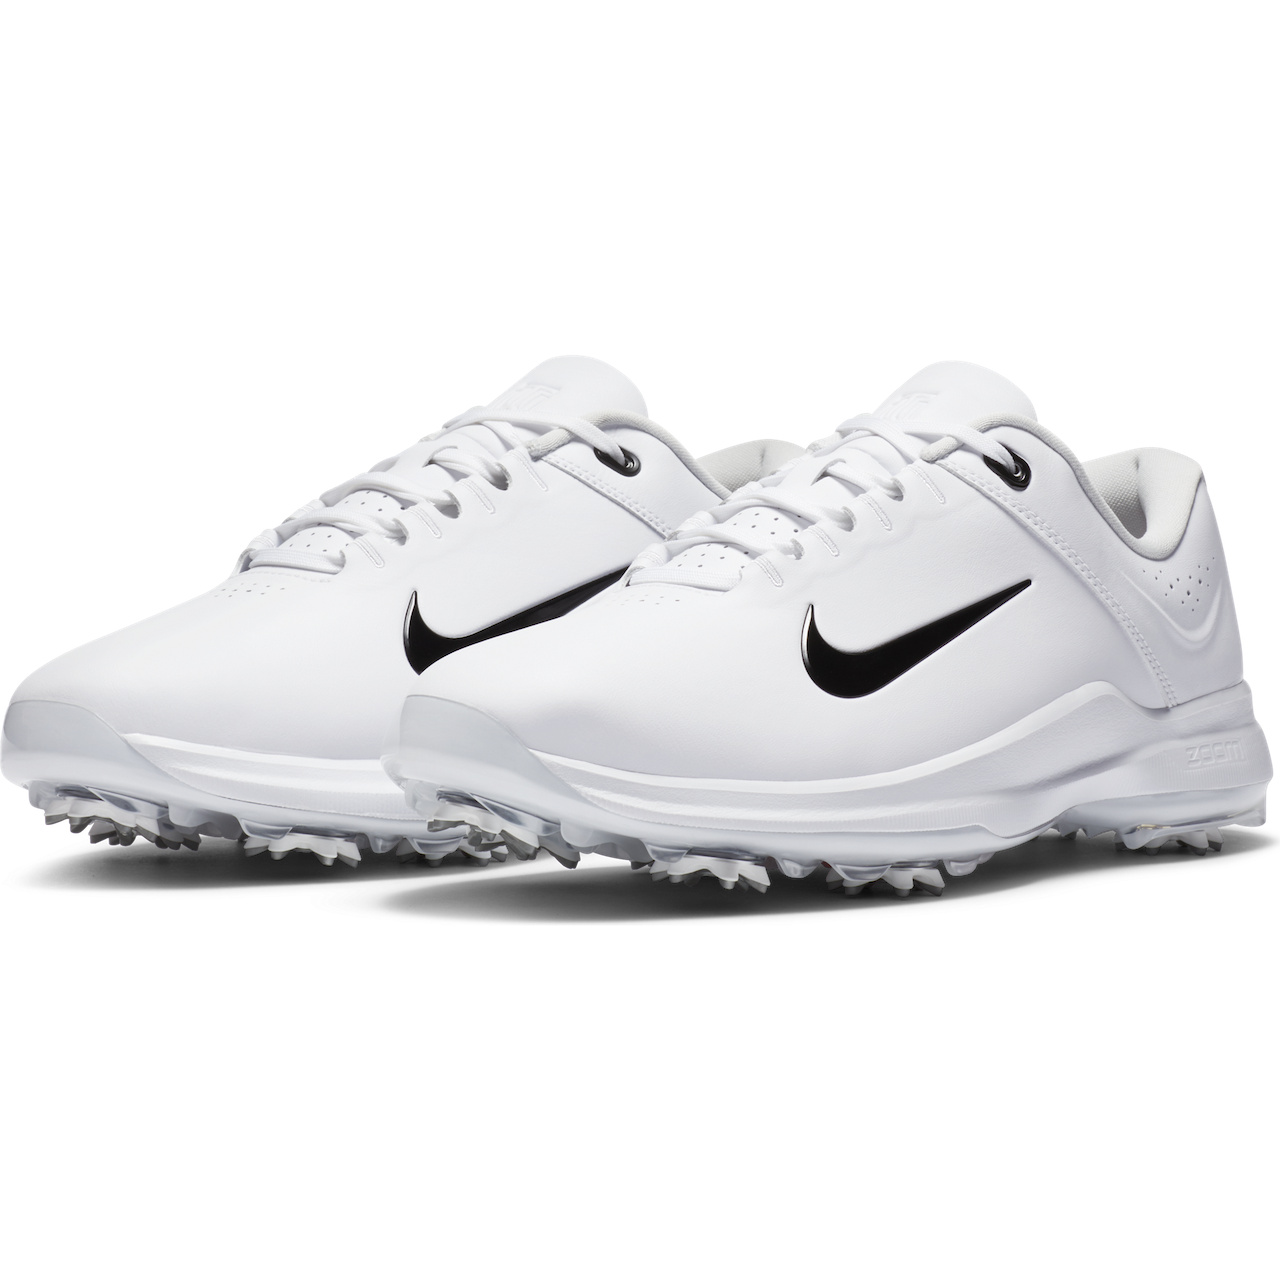 nike golf shoes tiger woods 2020